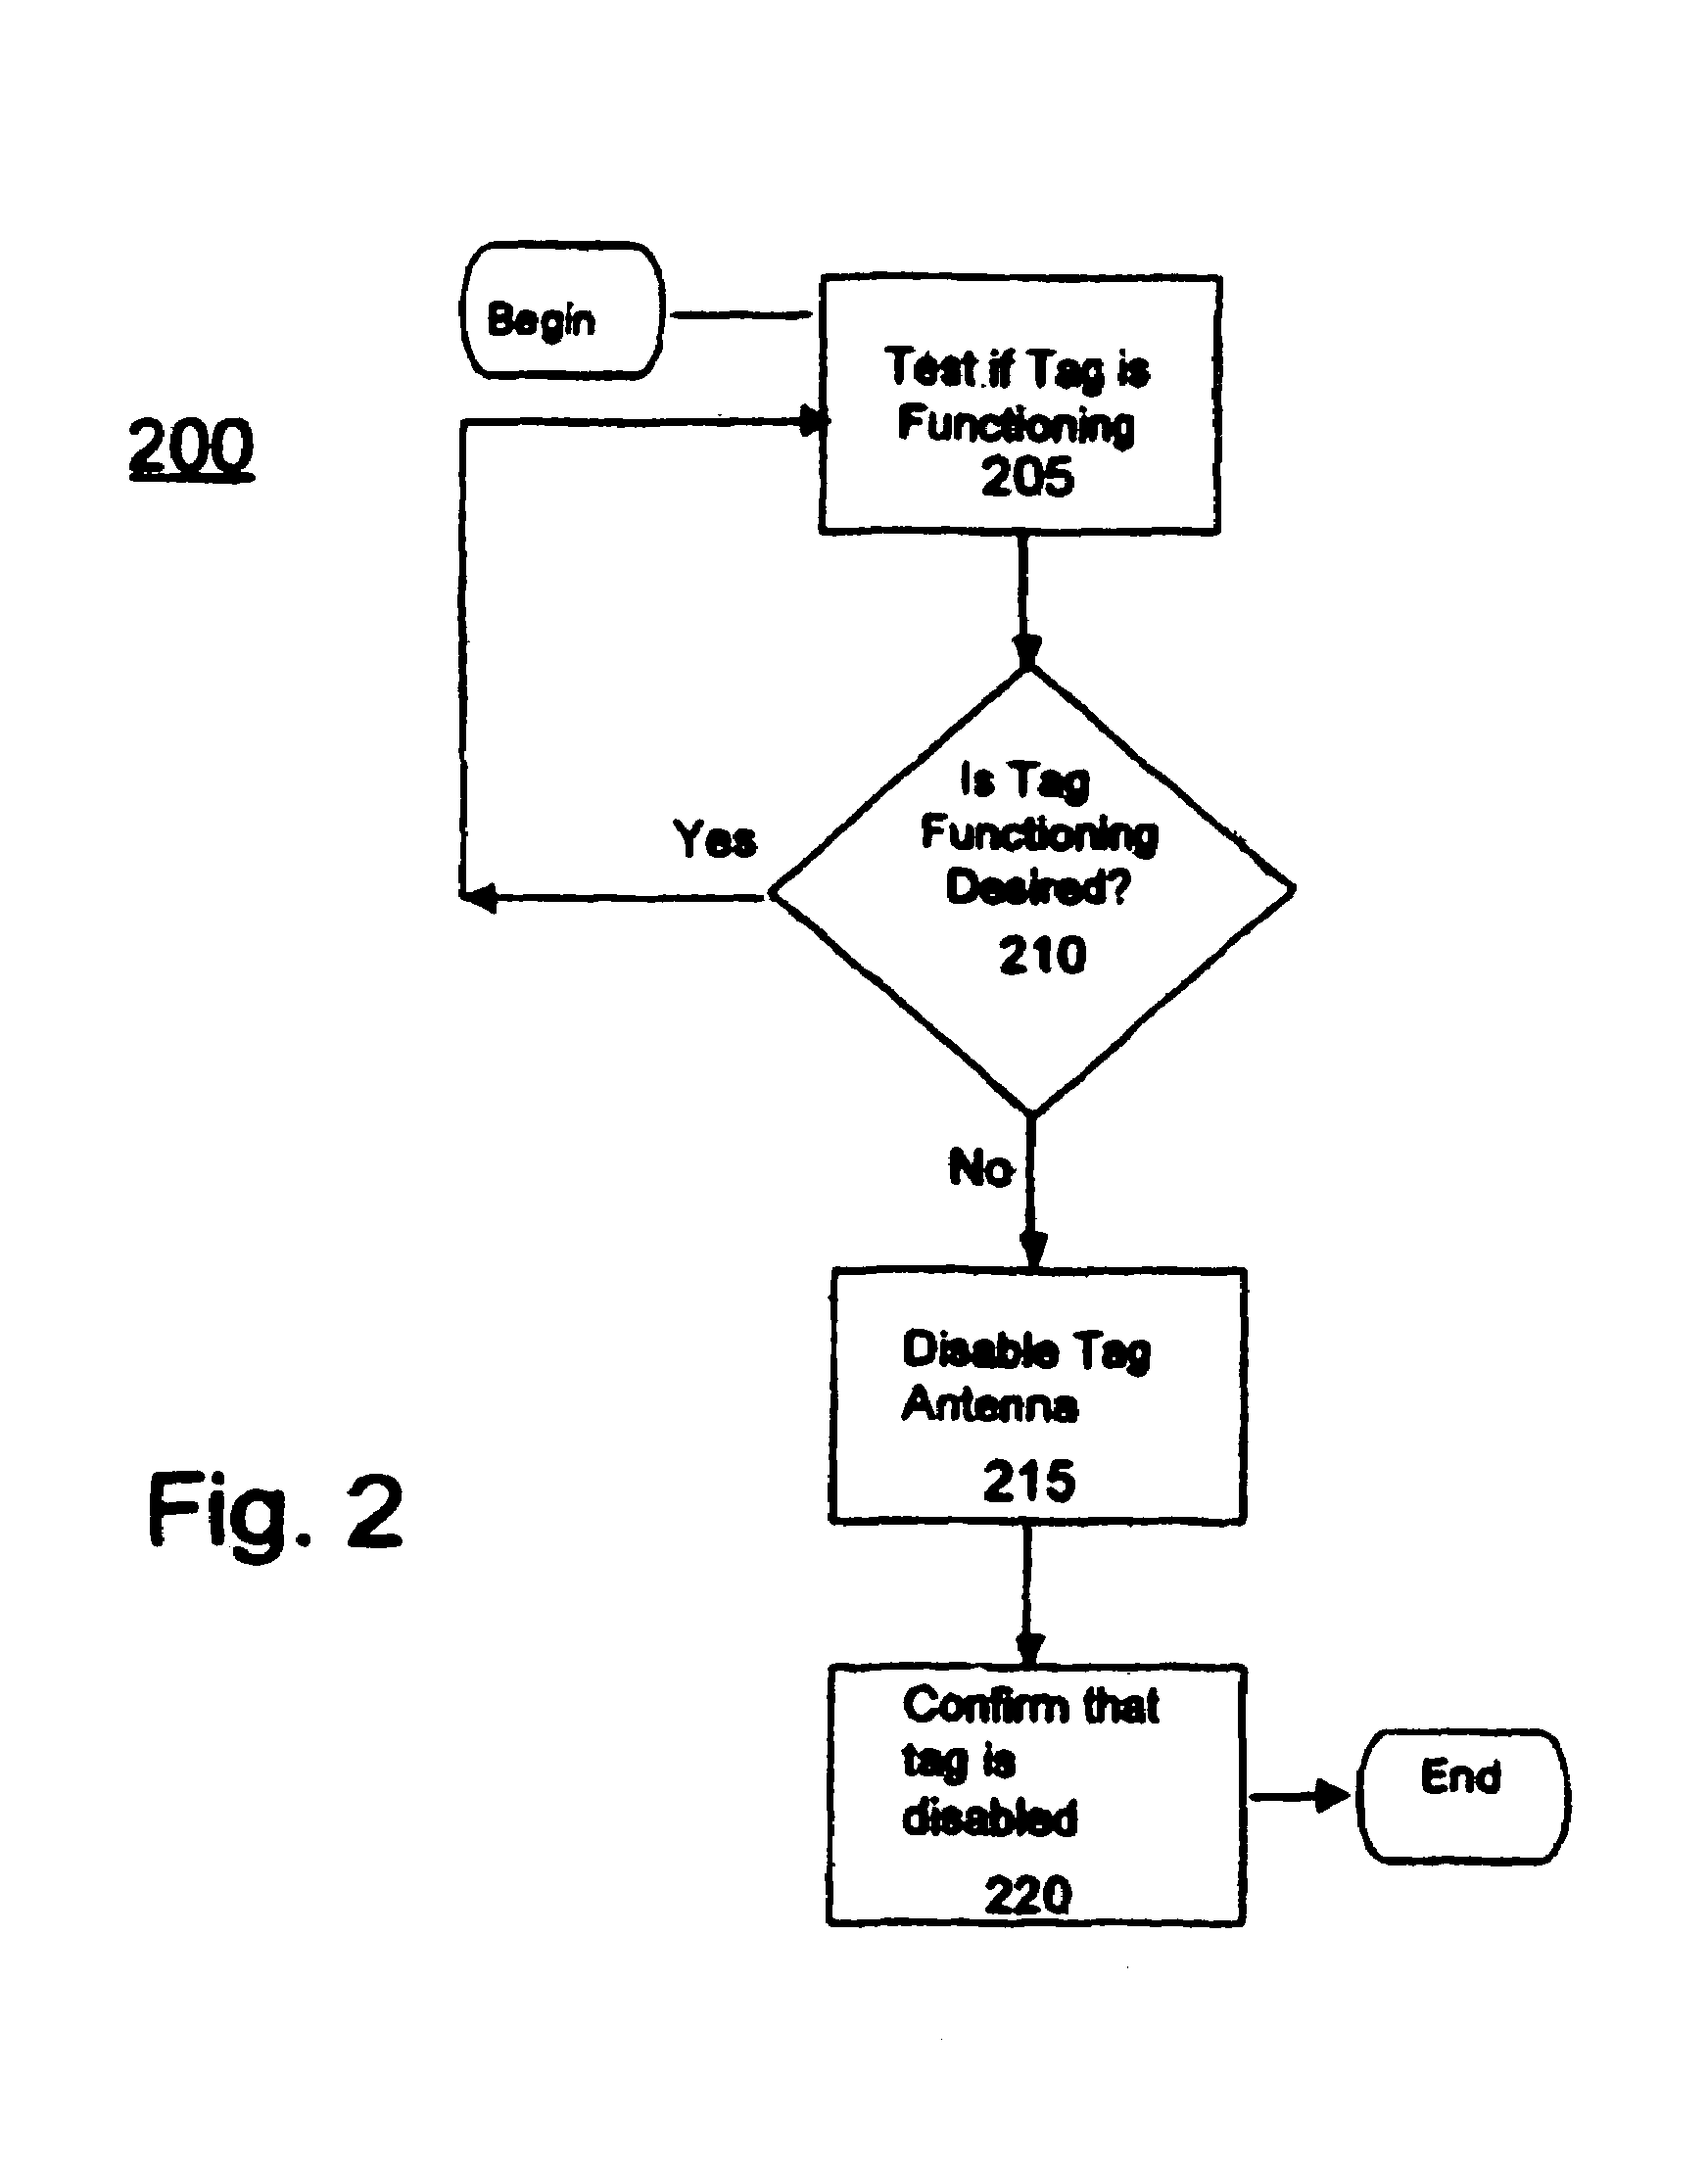 System and method for altering or disabling RFID tags